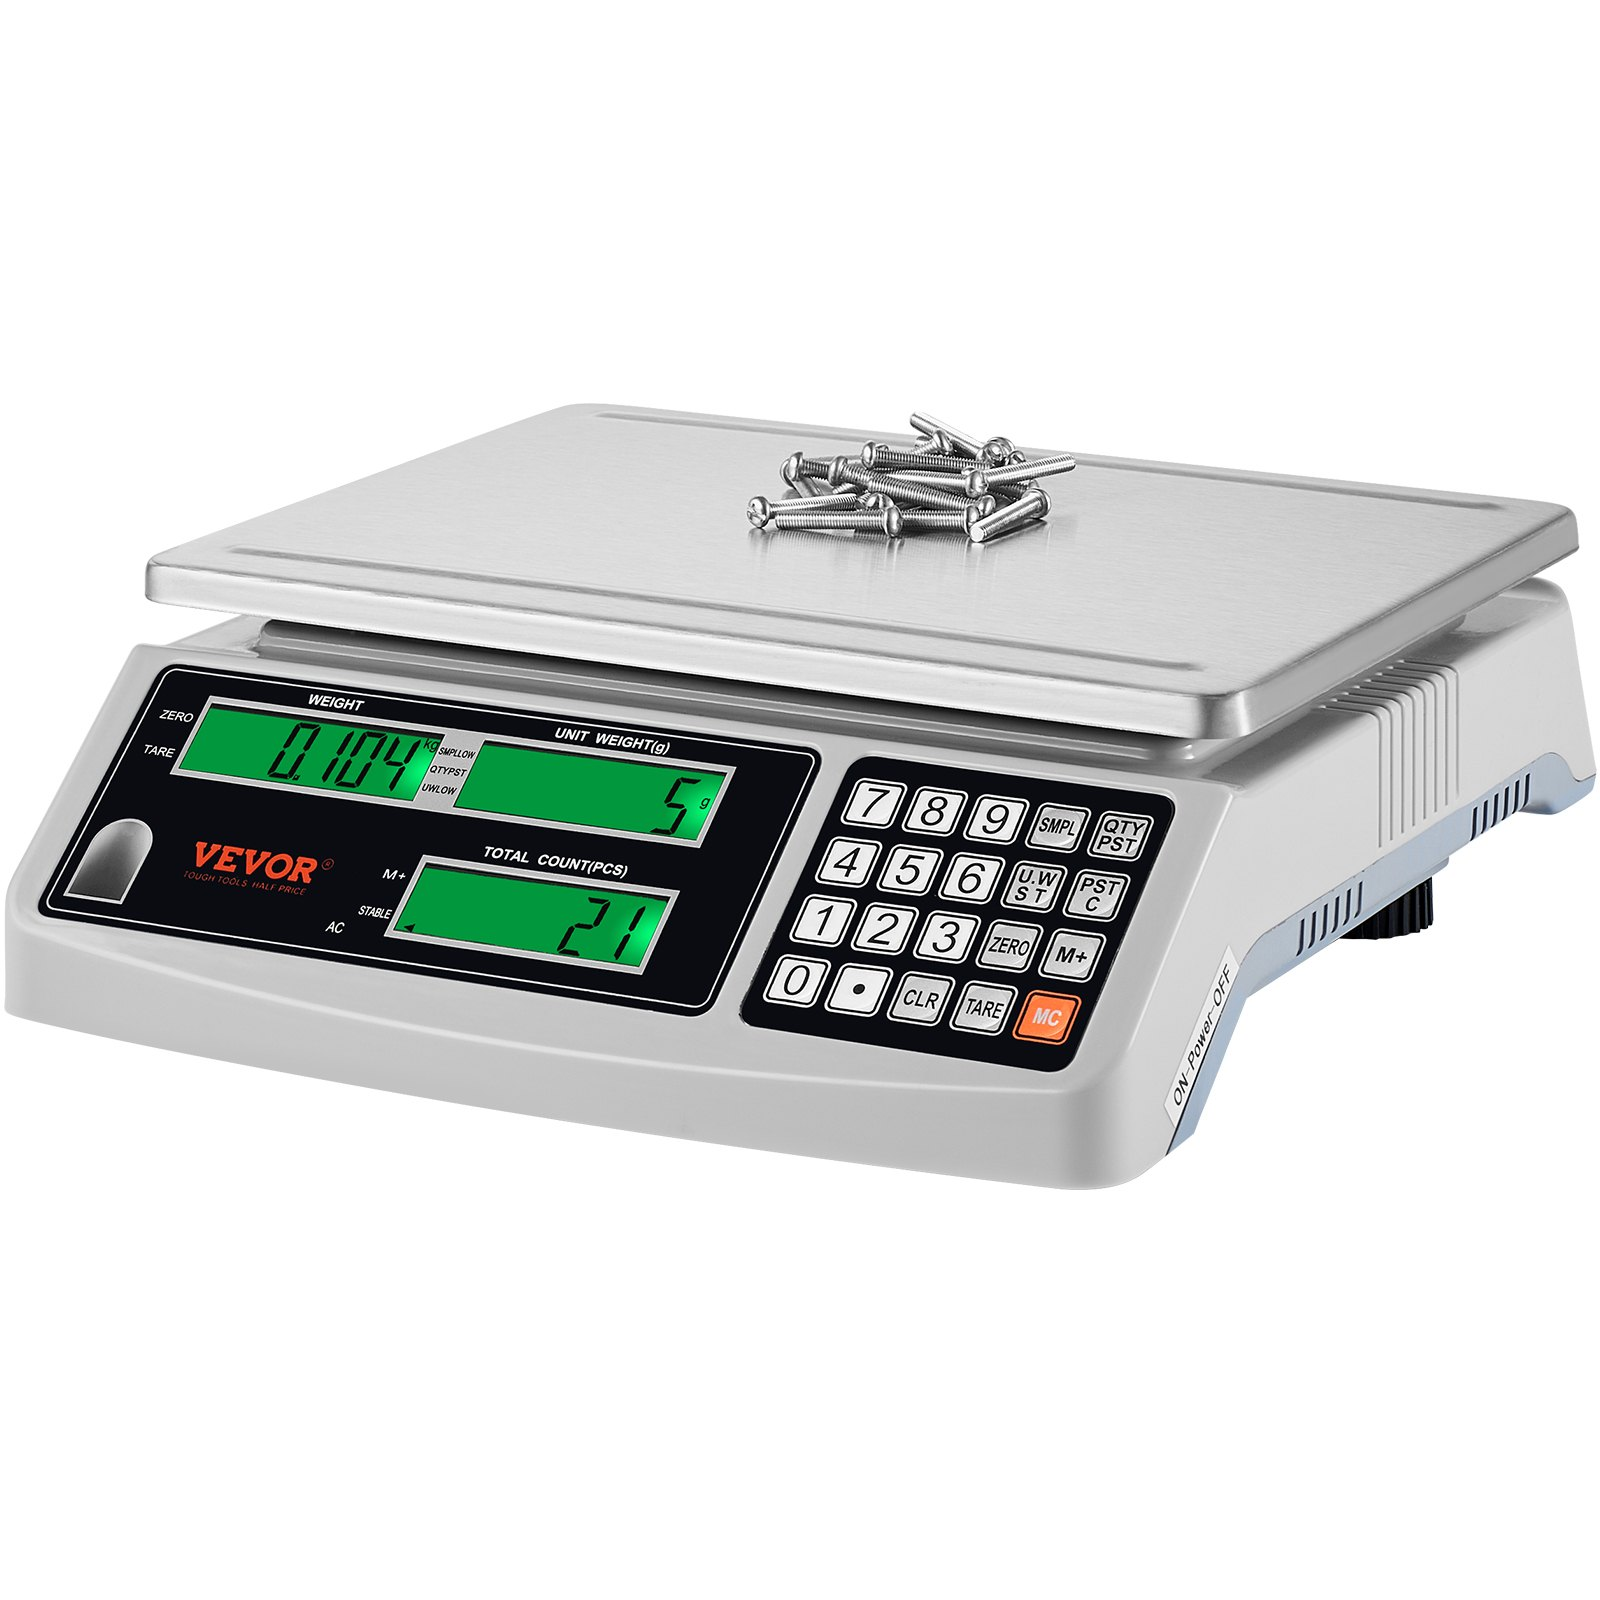 VEVOR Industrial Counting Scale, 30 kg x 1 g, Digital Scale for Parts and Coins, g/kg/lb Units, Electronic Gram Scale Inventory Piece Counting Scale Kitchen Jewelry Counting Scale with 3 LCD Screens, Goodies N Stuff